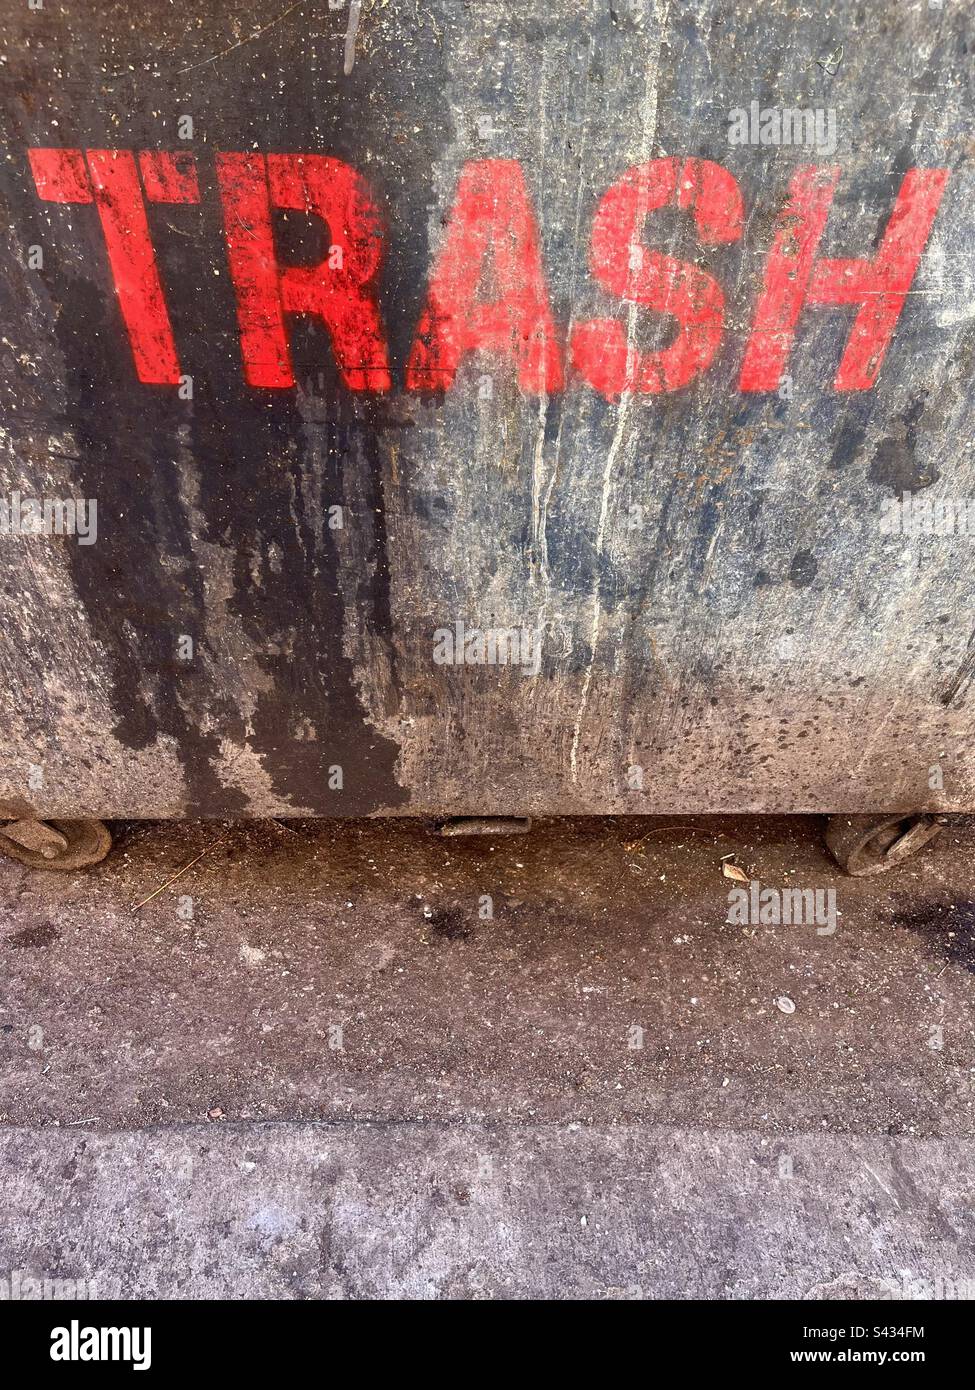 Dirty city alley dumpster, says TRASH in red letters. Includes print space. Stock Photo